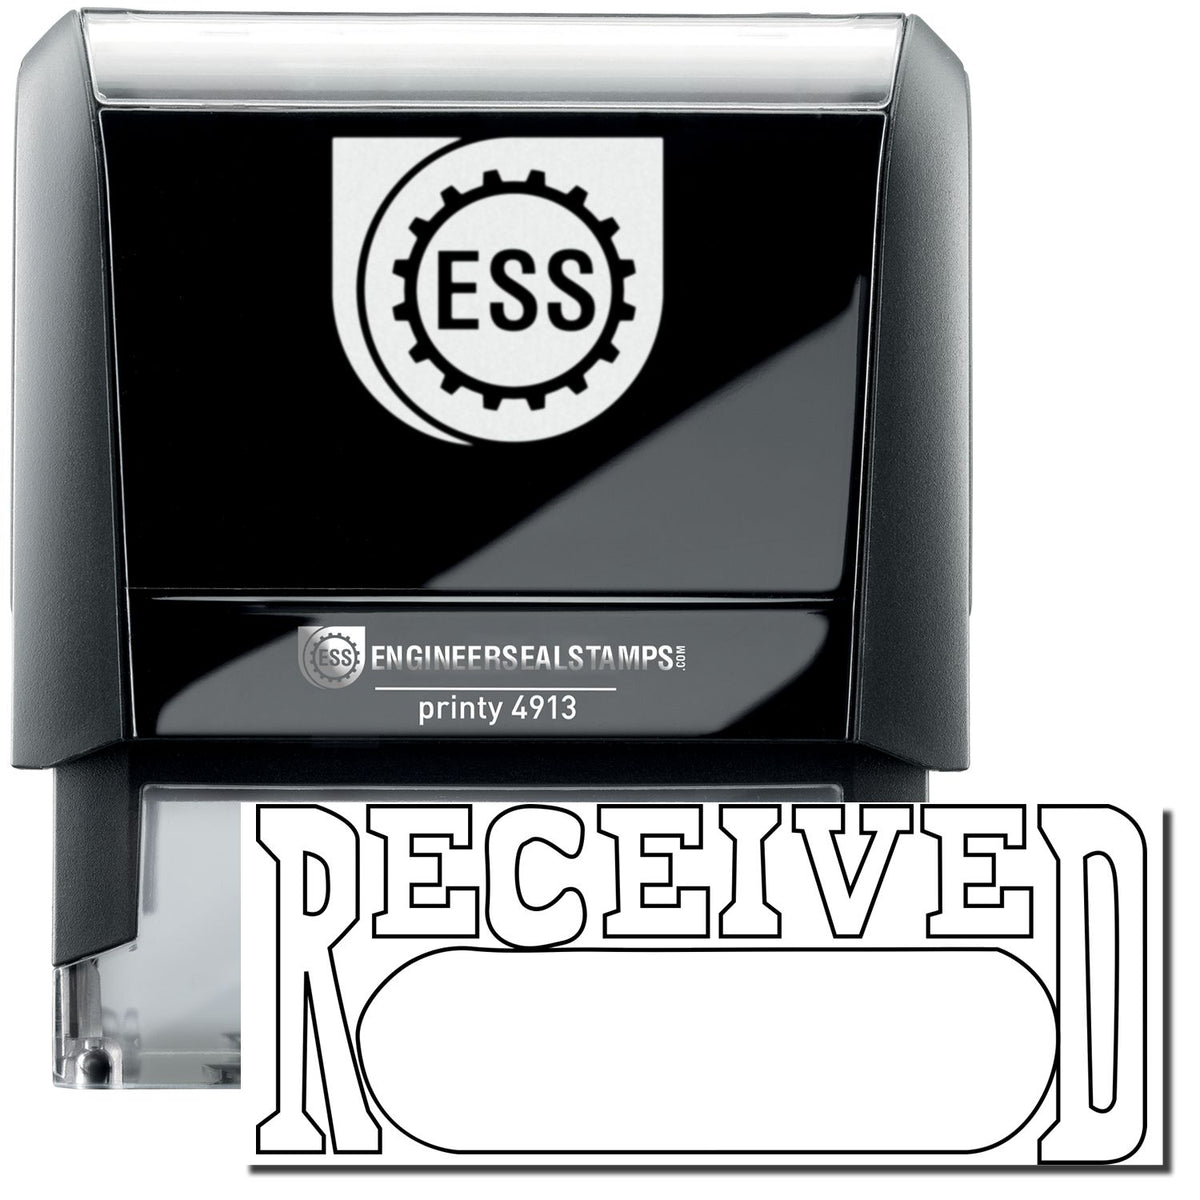 A self-inking stamp with a stamped image showing how the text &quot;RECEIVED&quot; in a large outline font with a date box under it is displayed after stamping.